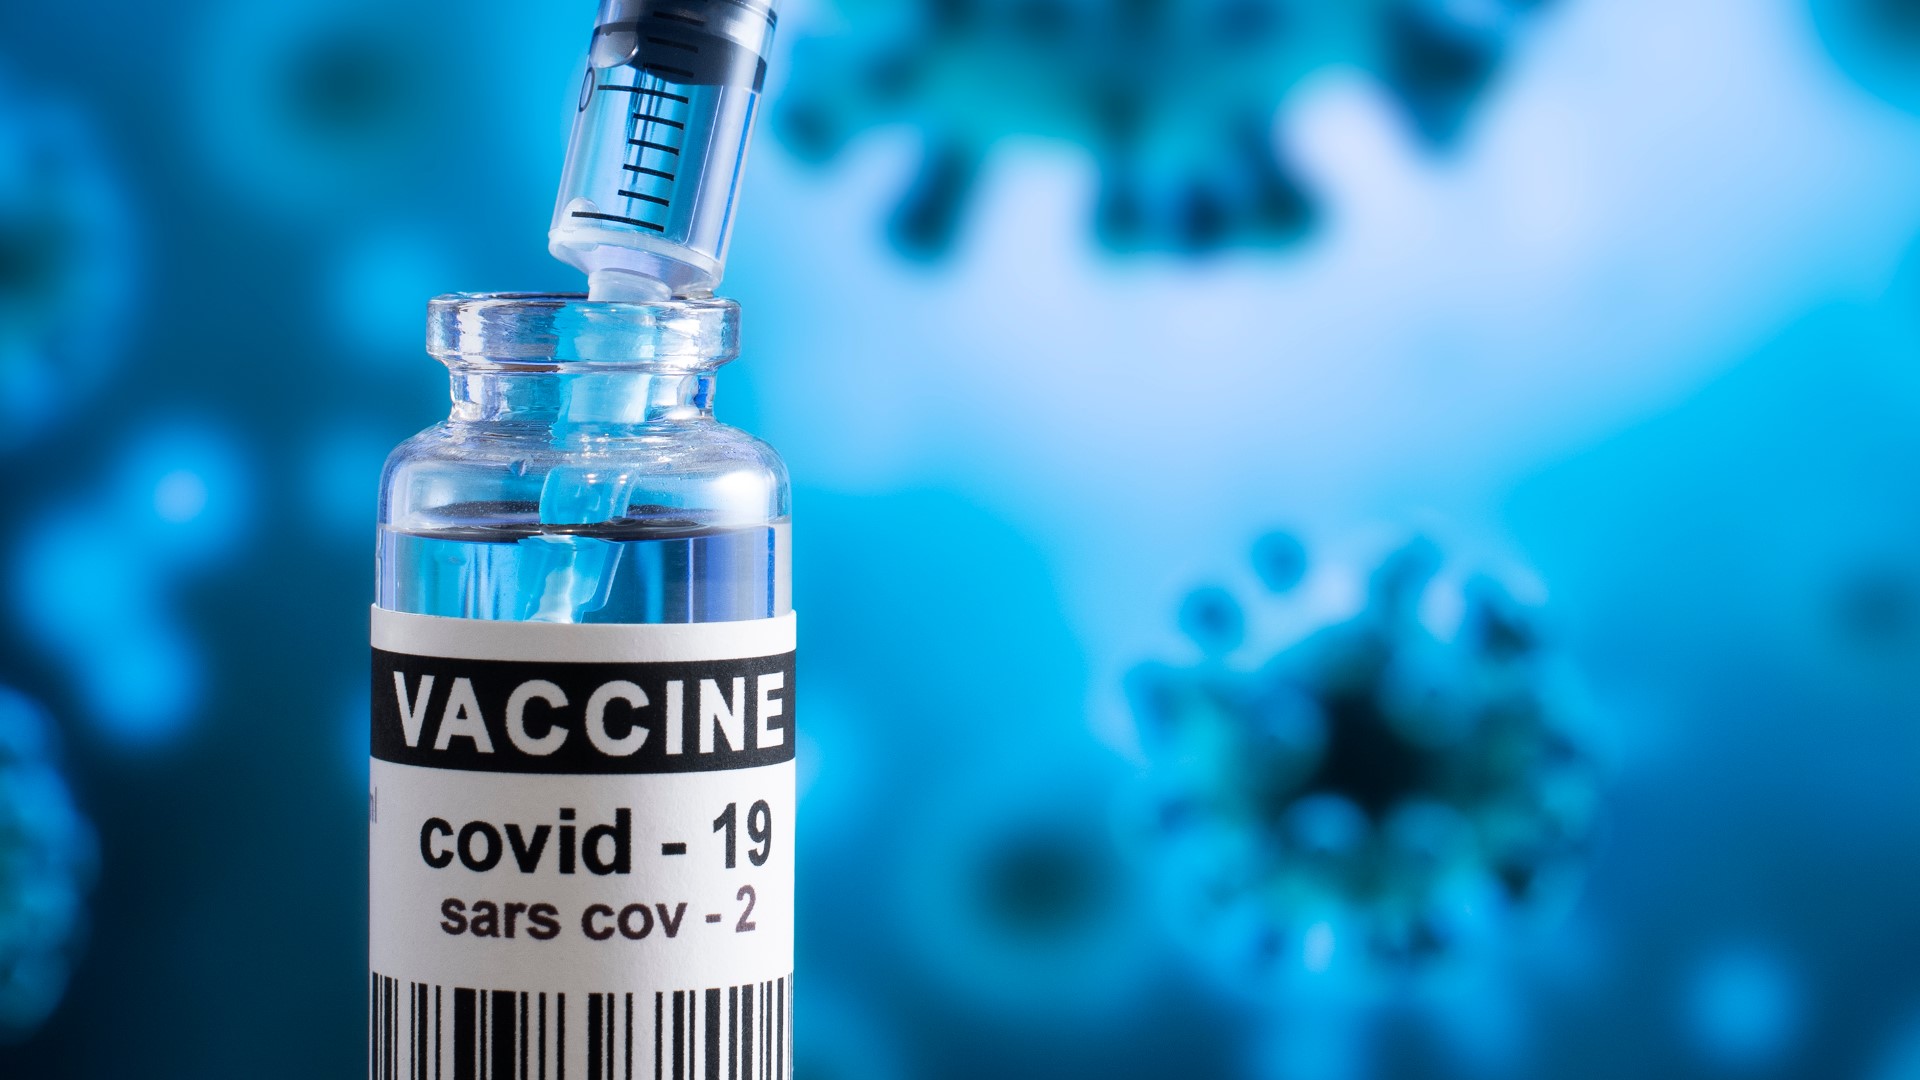 6 News went to the health experts, asking some of your common COVID-19 vaccine questions.